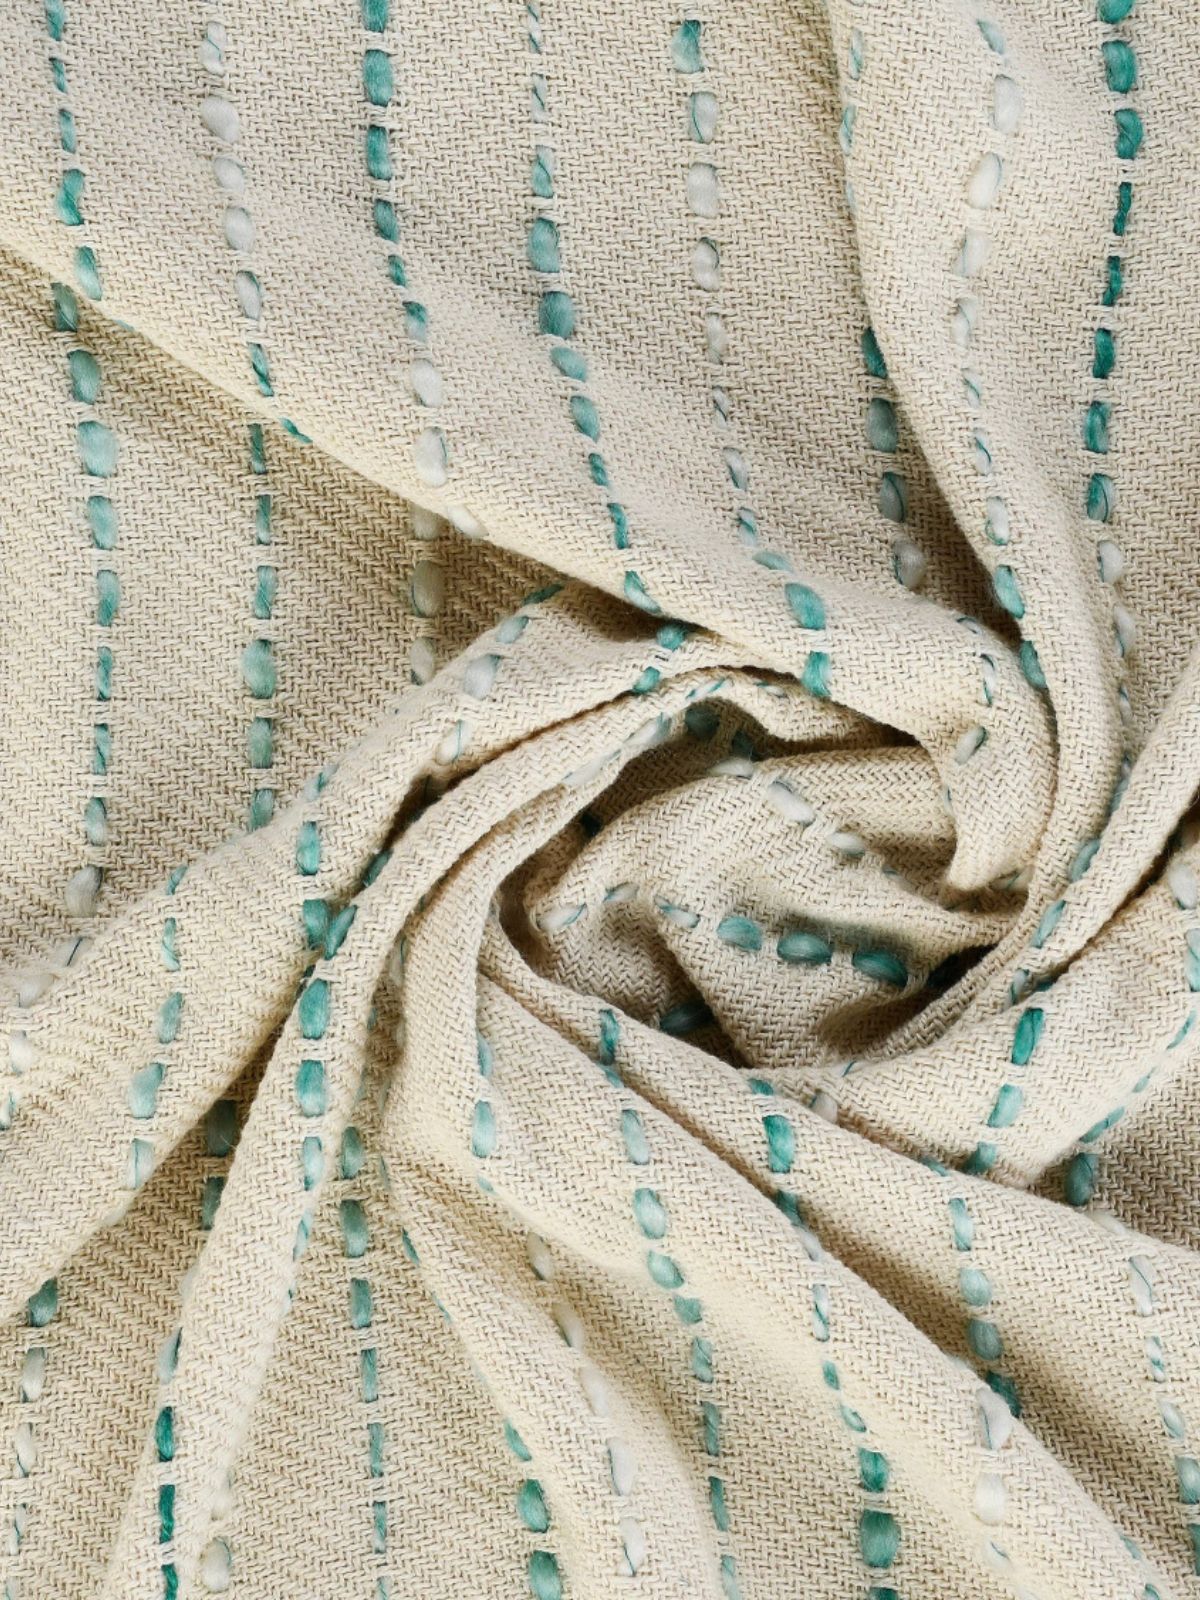 Teal Stripe Woven Cotton Throw Blanket with Fringe Size 50W x 60L. 